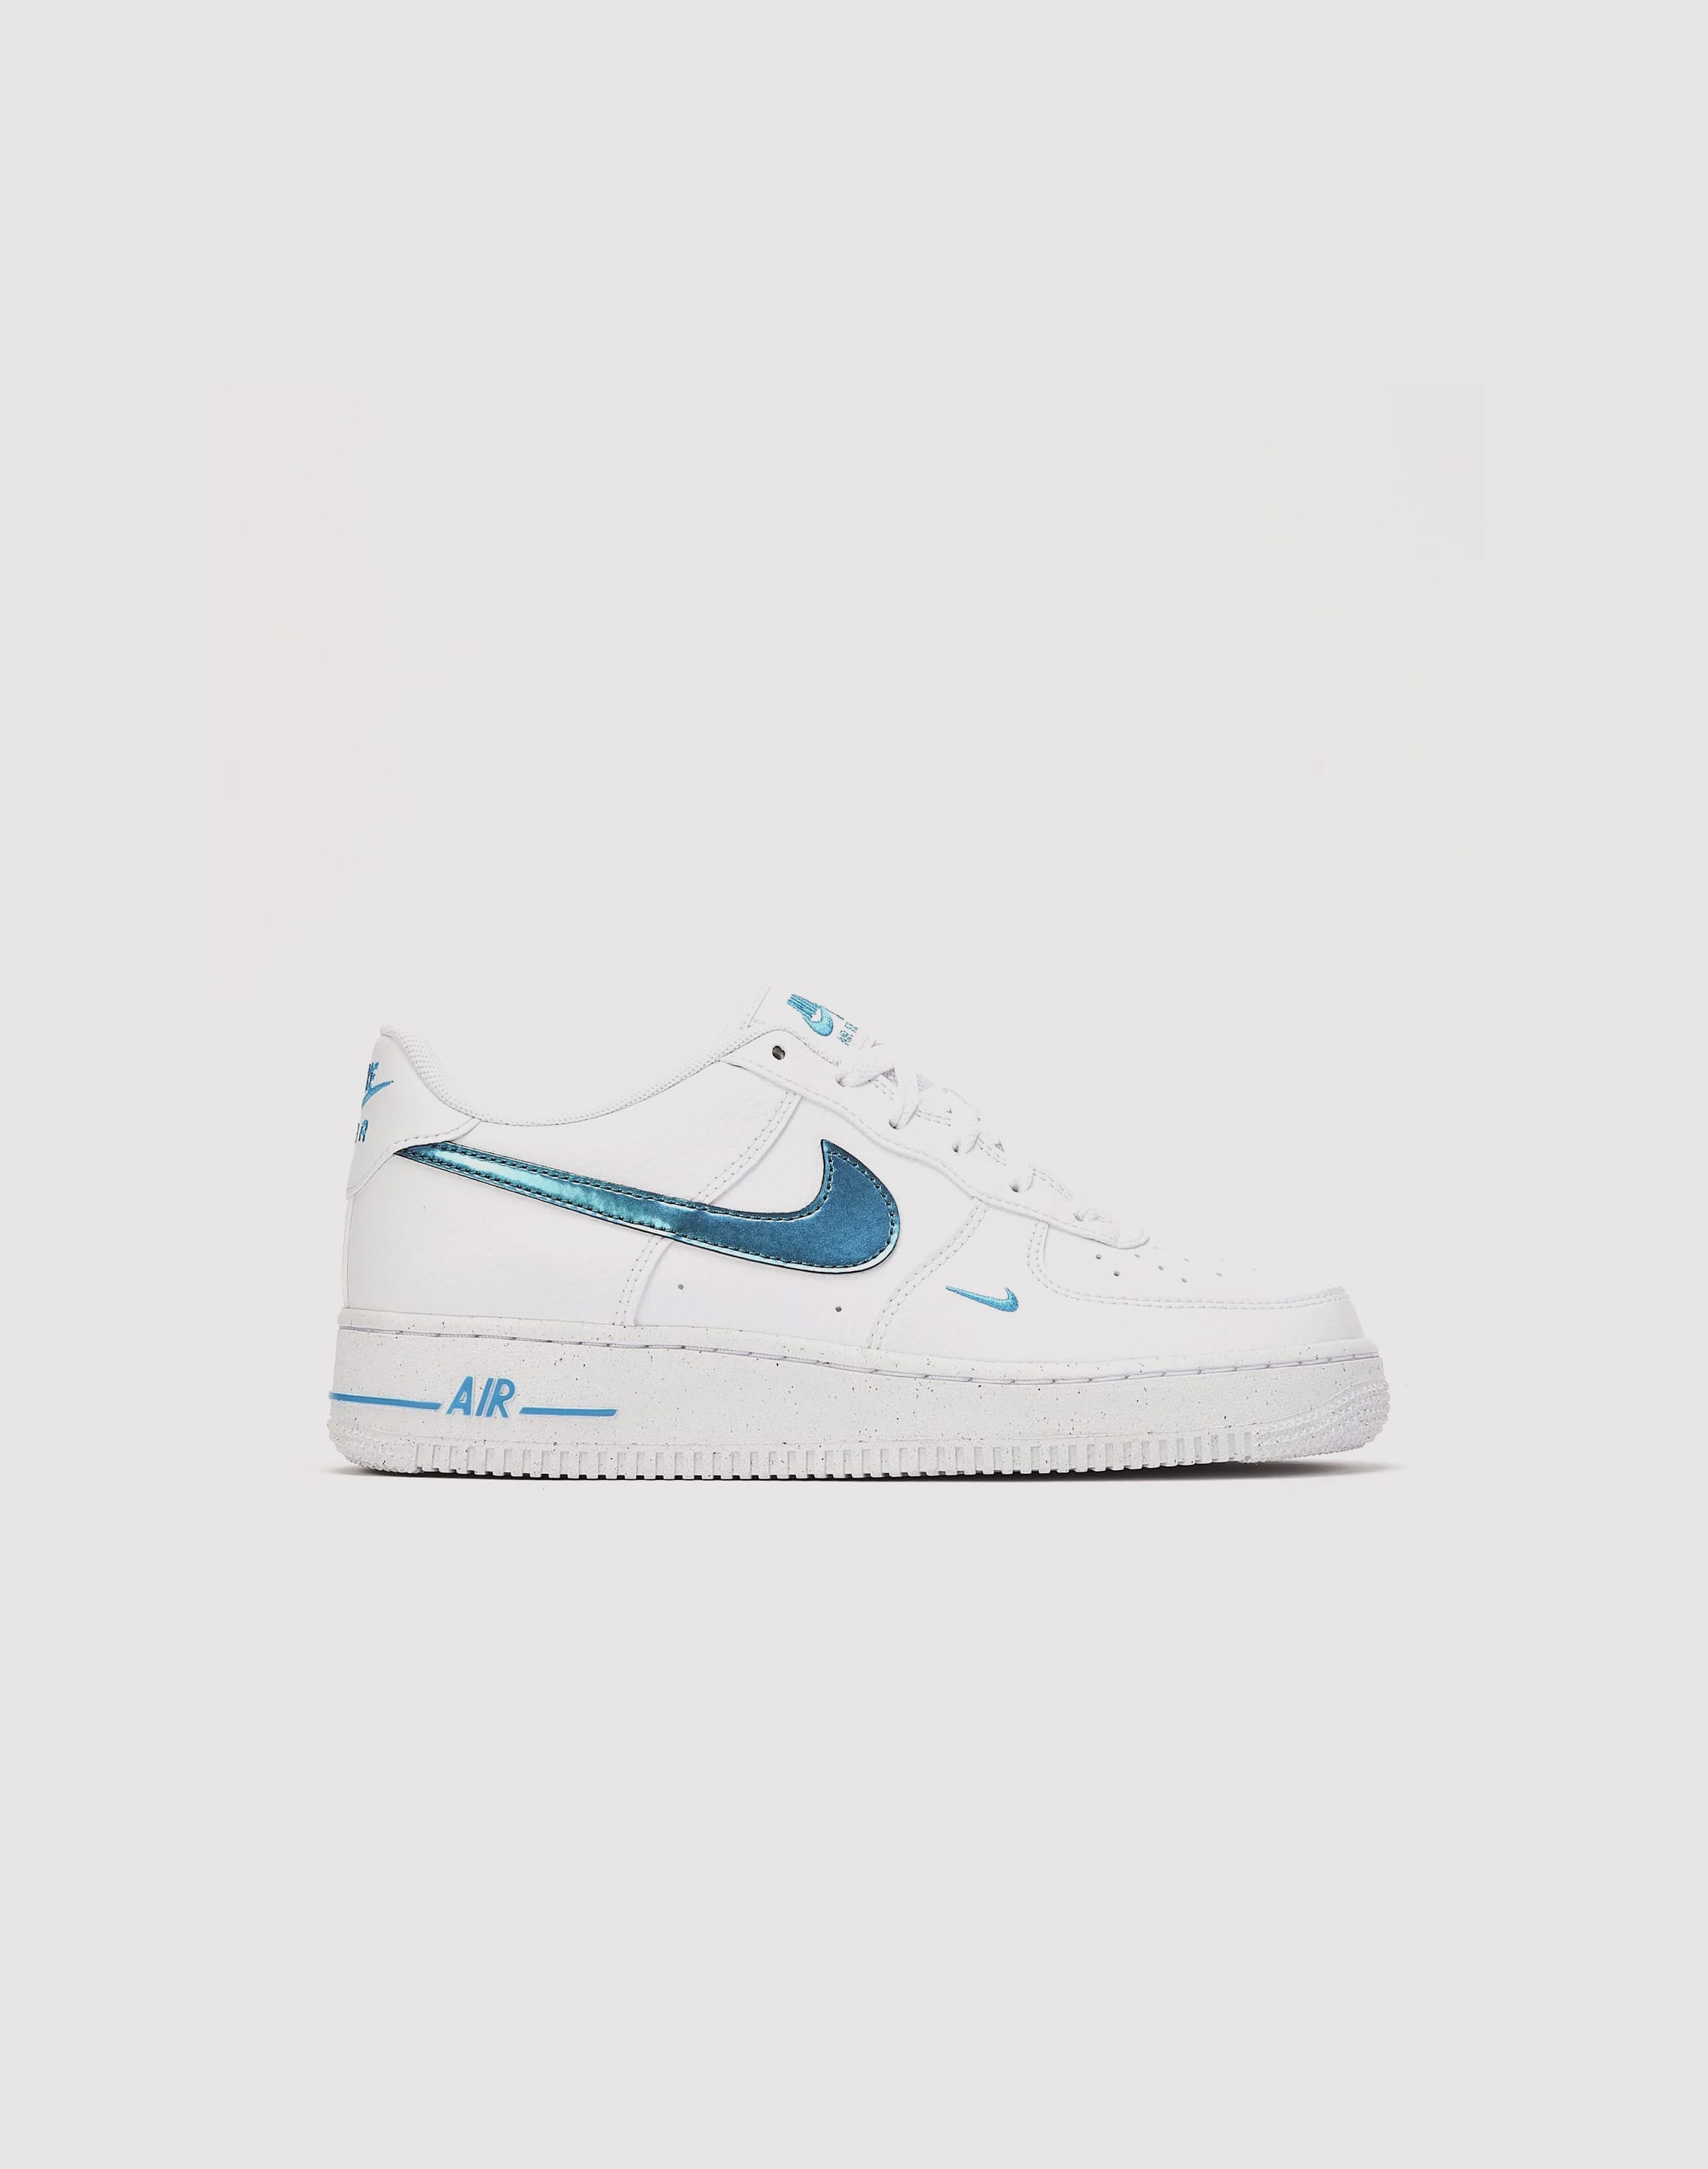 Nike Air Force 1 Impact Next – DTLR